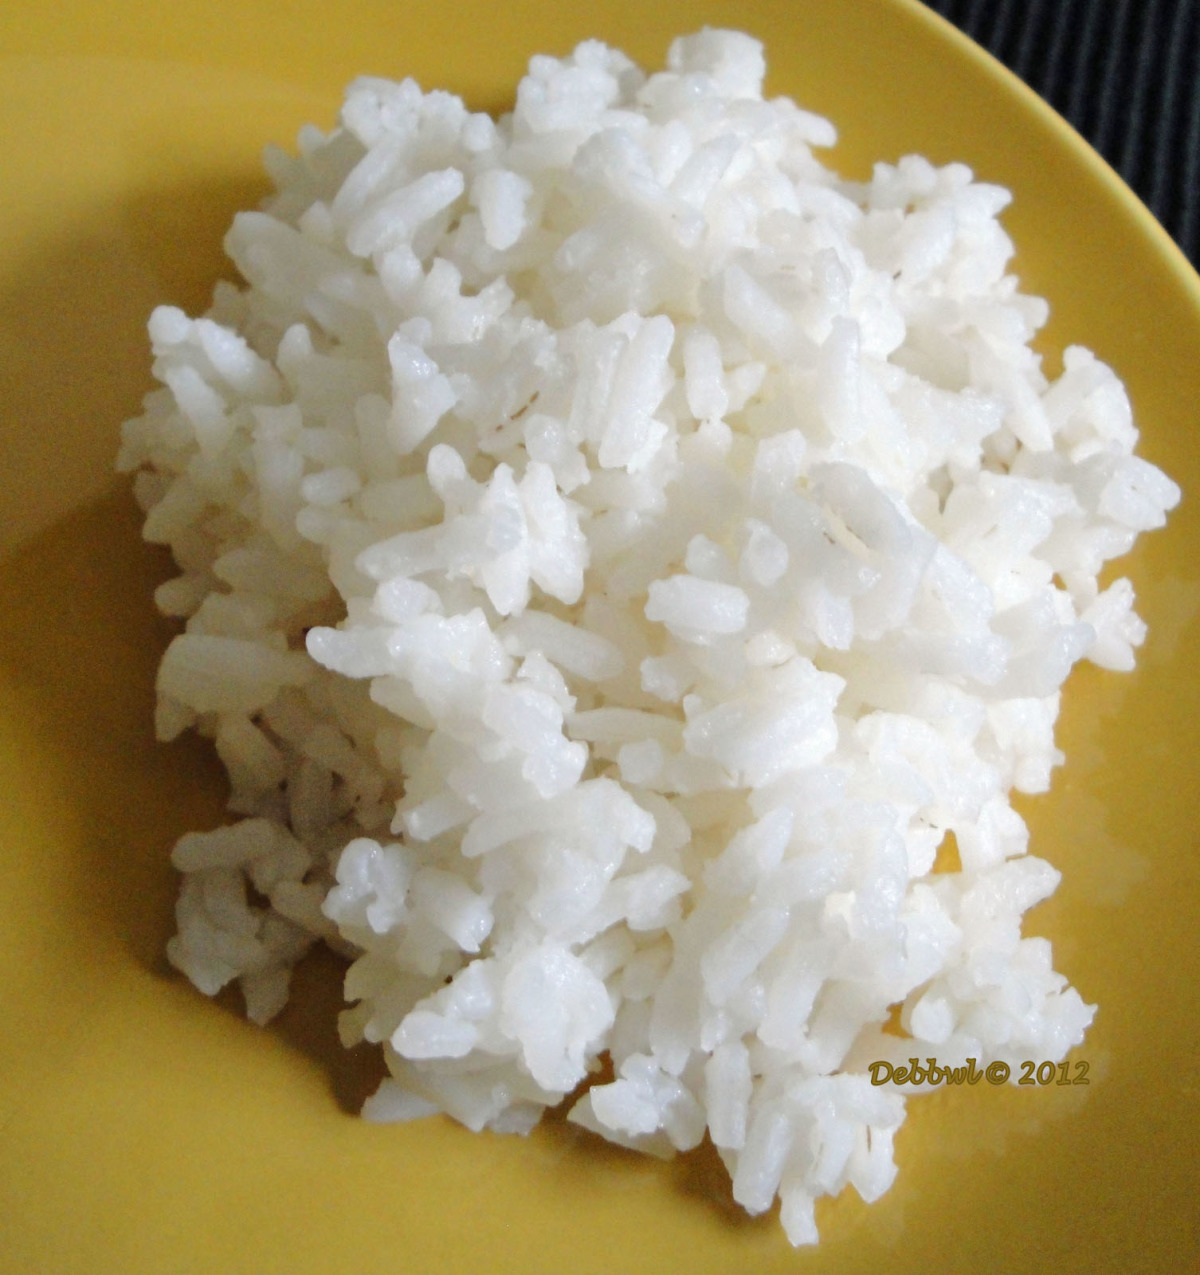 Perfect Steamed Rice Recipe